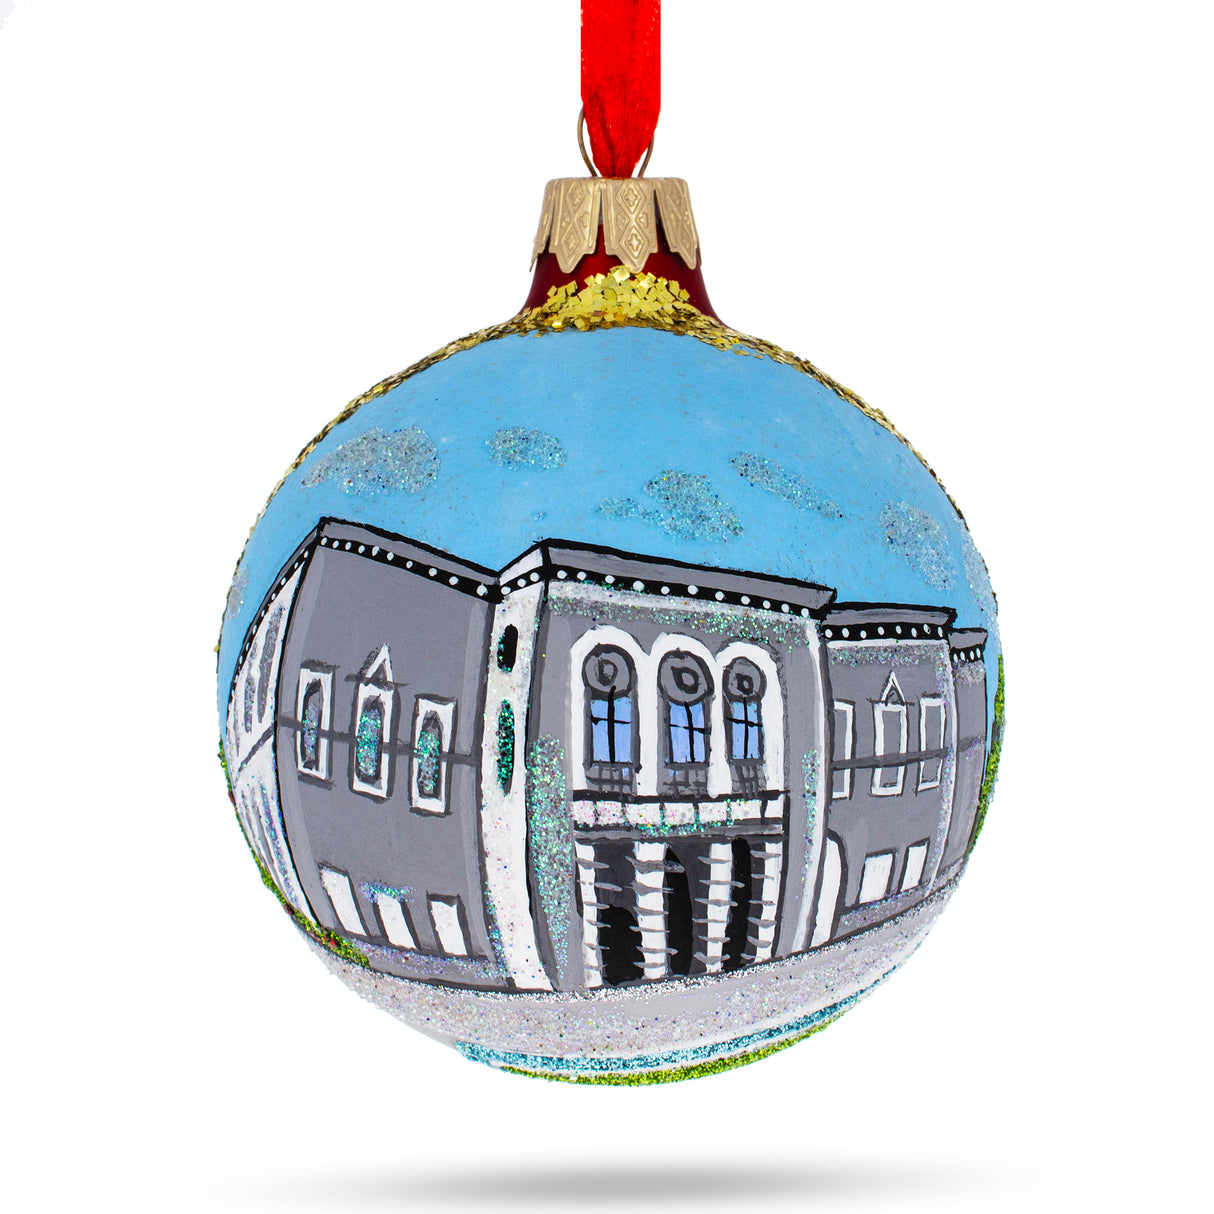 National Gallery, Dublin, Ireland Glass Ball Christmas Ornament 3.25 Inches in Multi color, Round shape